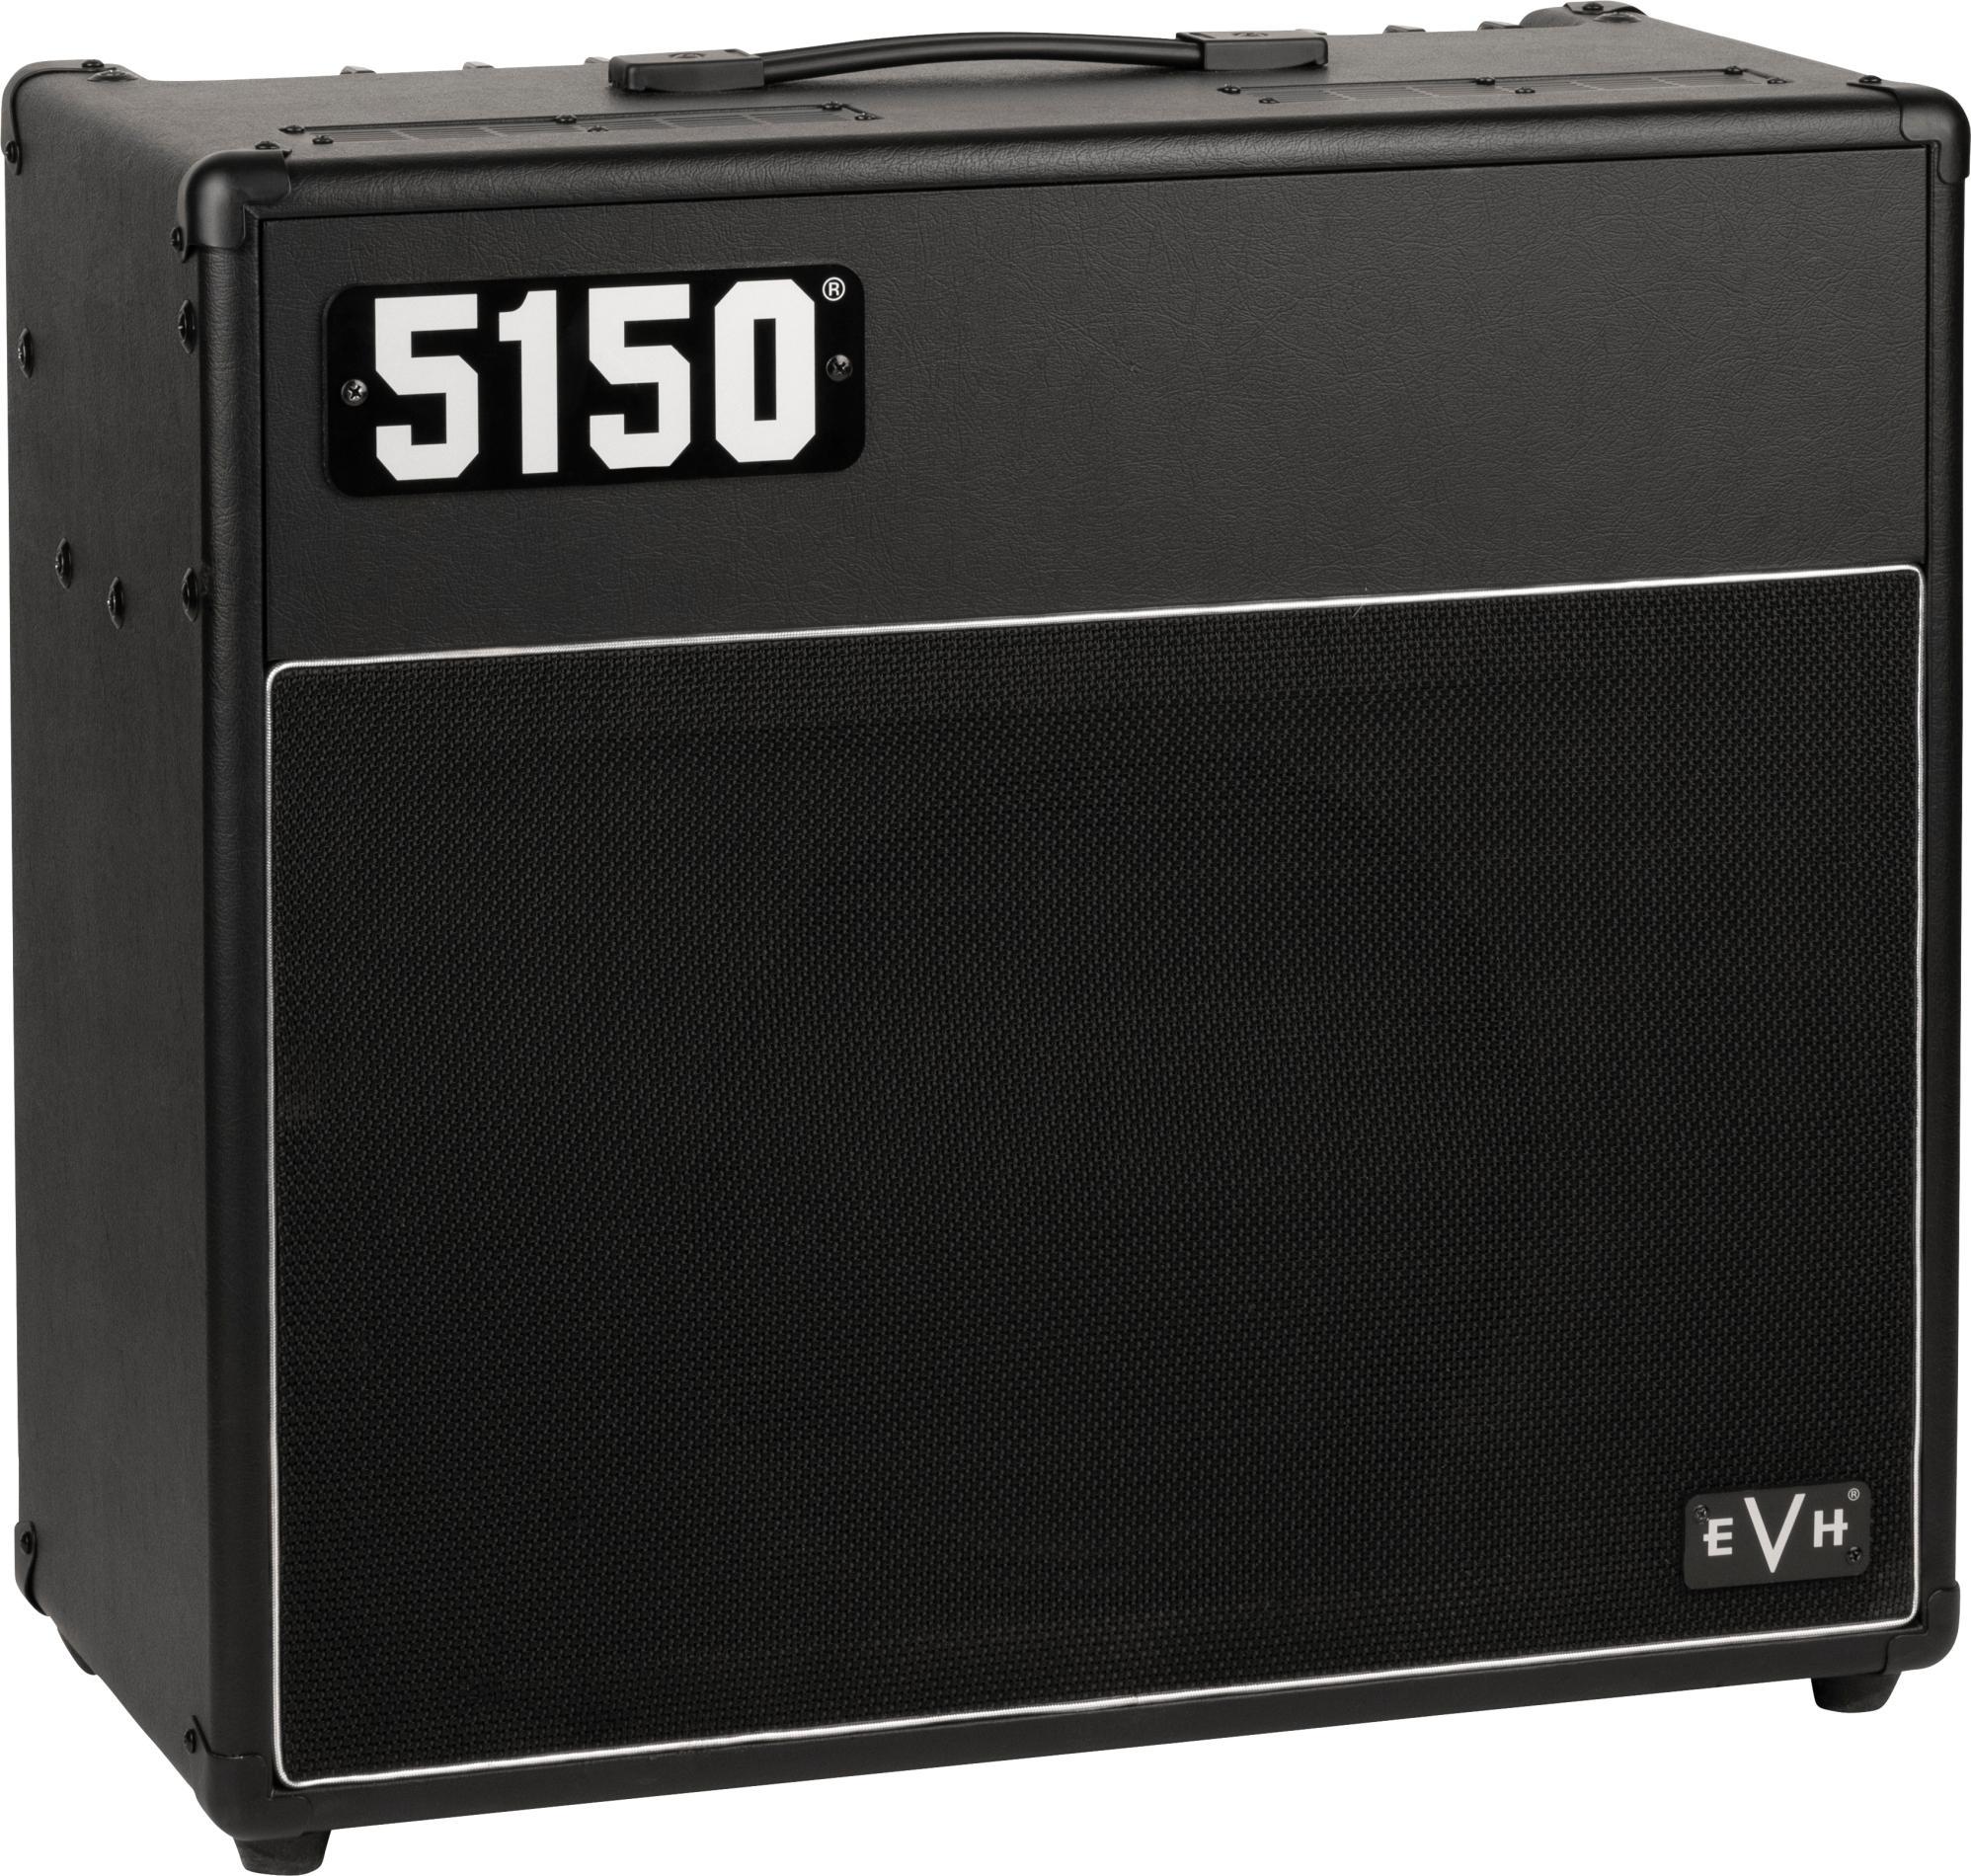 Electric guitar combo amp Evh                            5150 Iconic Combo Black 40W